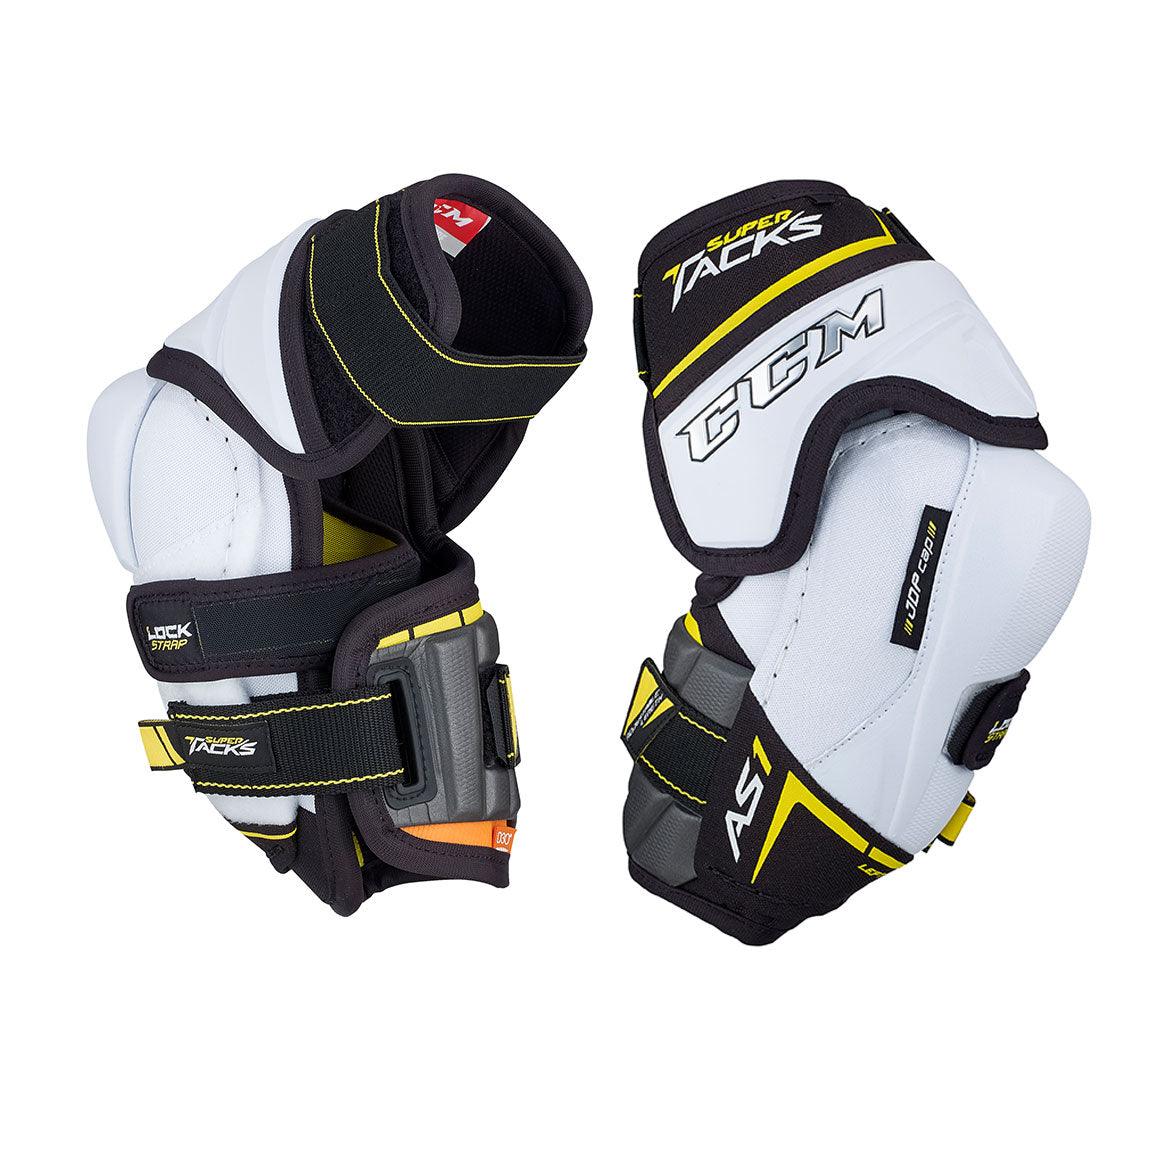 Super Tacks AS1 Elbow Pads - Senior - Sports Excellence